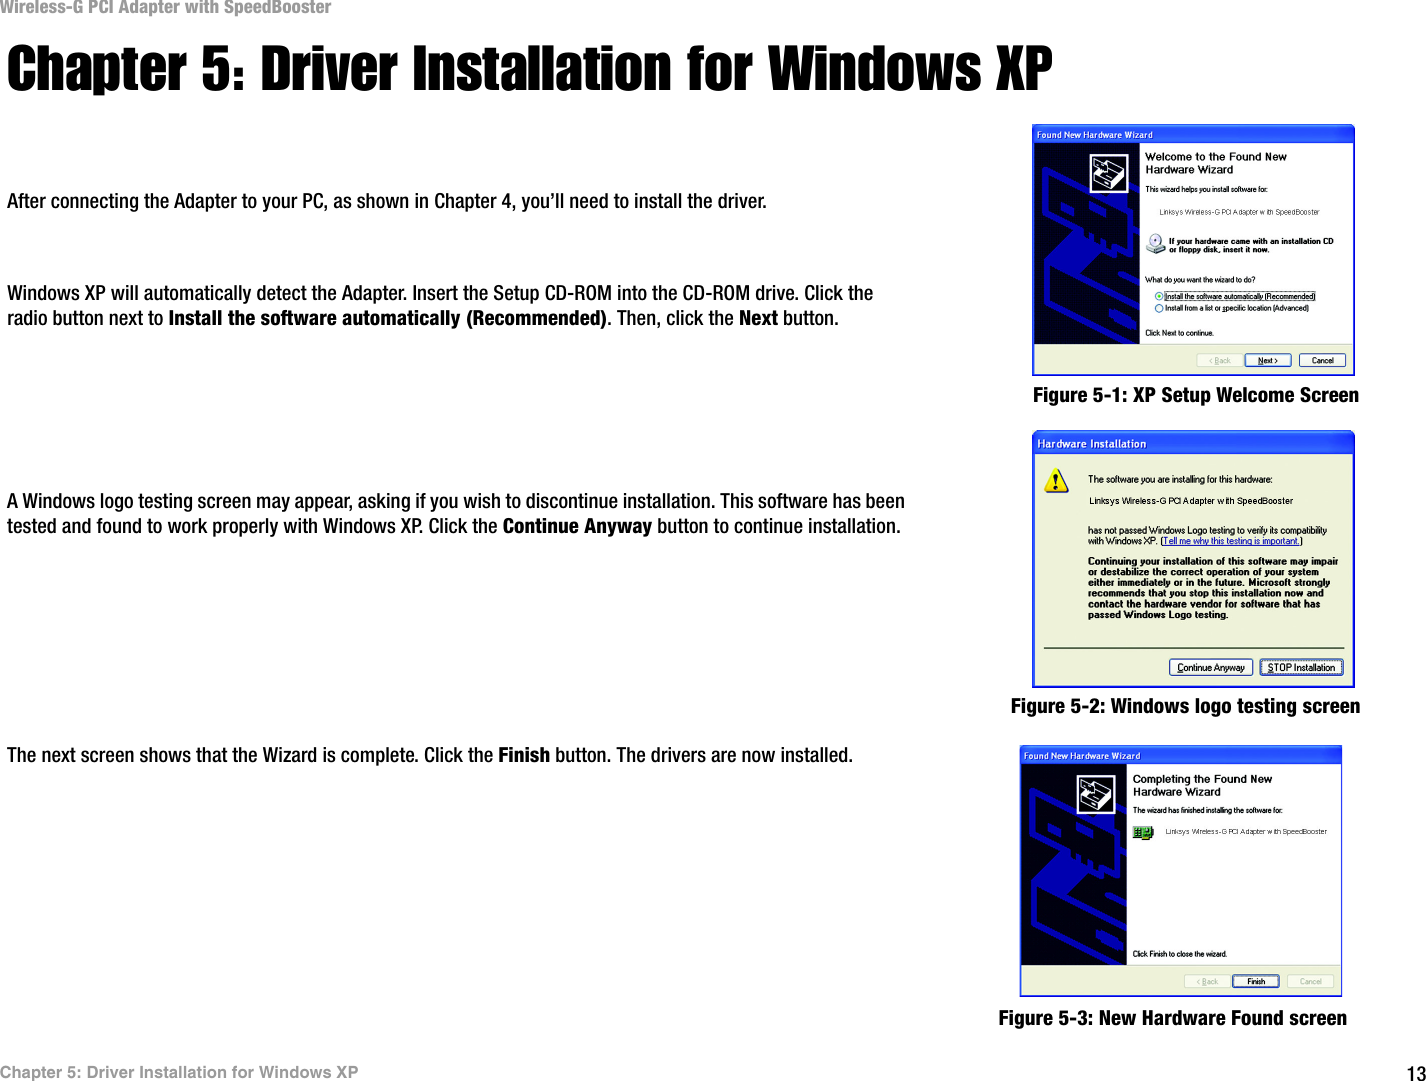 13Chapter 5: Driver Installation for Windows XPWireless-G PCI Adapter with SpeedBoosterChapter 5: Driver Installation for Windows XPAfter connecting the Adapter to your PC, as shown in Chapter 4, you’ll need to install the driver.Windows XP will automatically detect the Adapter. Insert the Setup CD-ROM into the CD-ROM drive. Click the radio button next to Install the software automatically (Recommended). Then, click the Next button.A Windows logo testing screen may appear, asking if you wish to discontinue installation. This software has been tested and found to work properly with Windows XP. Click the Continue Anyway button to continue installation.The next screen shows that the Wizard is complete. Click the Finish button. The drivers are now installed. Figure 5-1: XP Setup Welcome ScreenFigure 5-2: Windows logo testing screenFigure 5-3: New Hardware Found screen